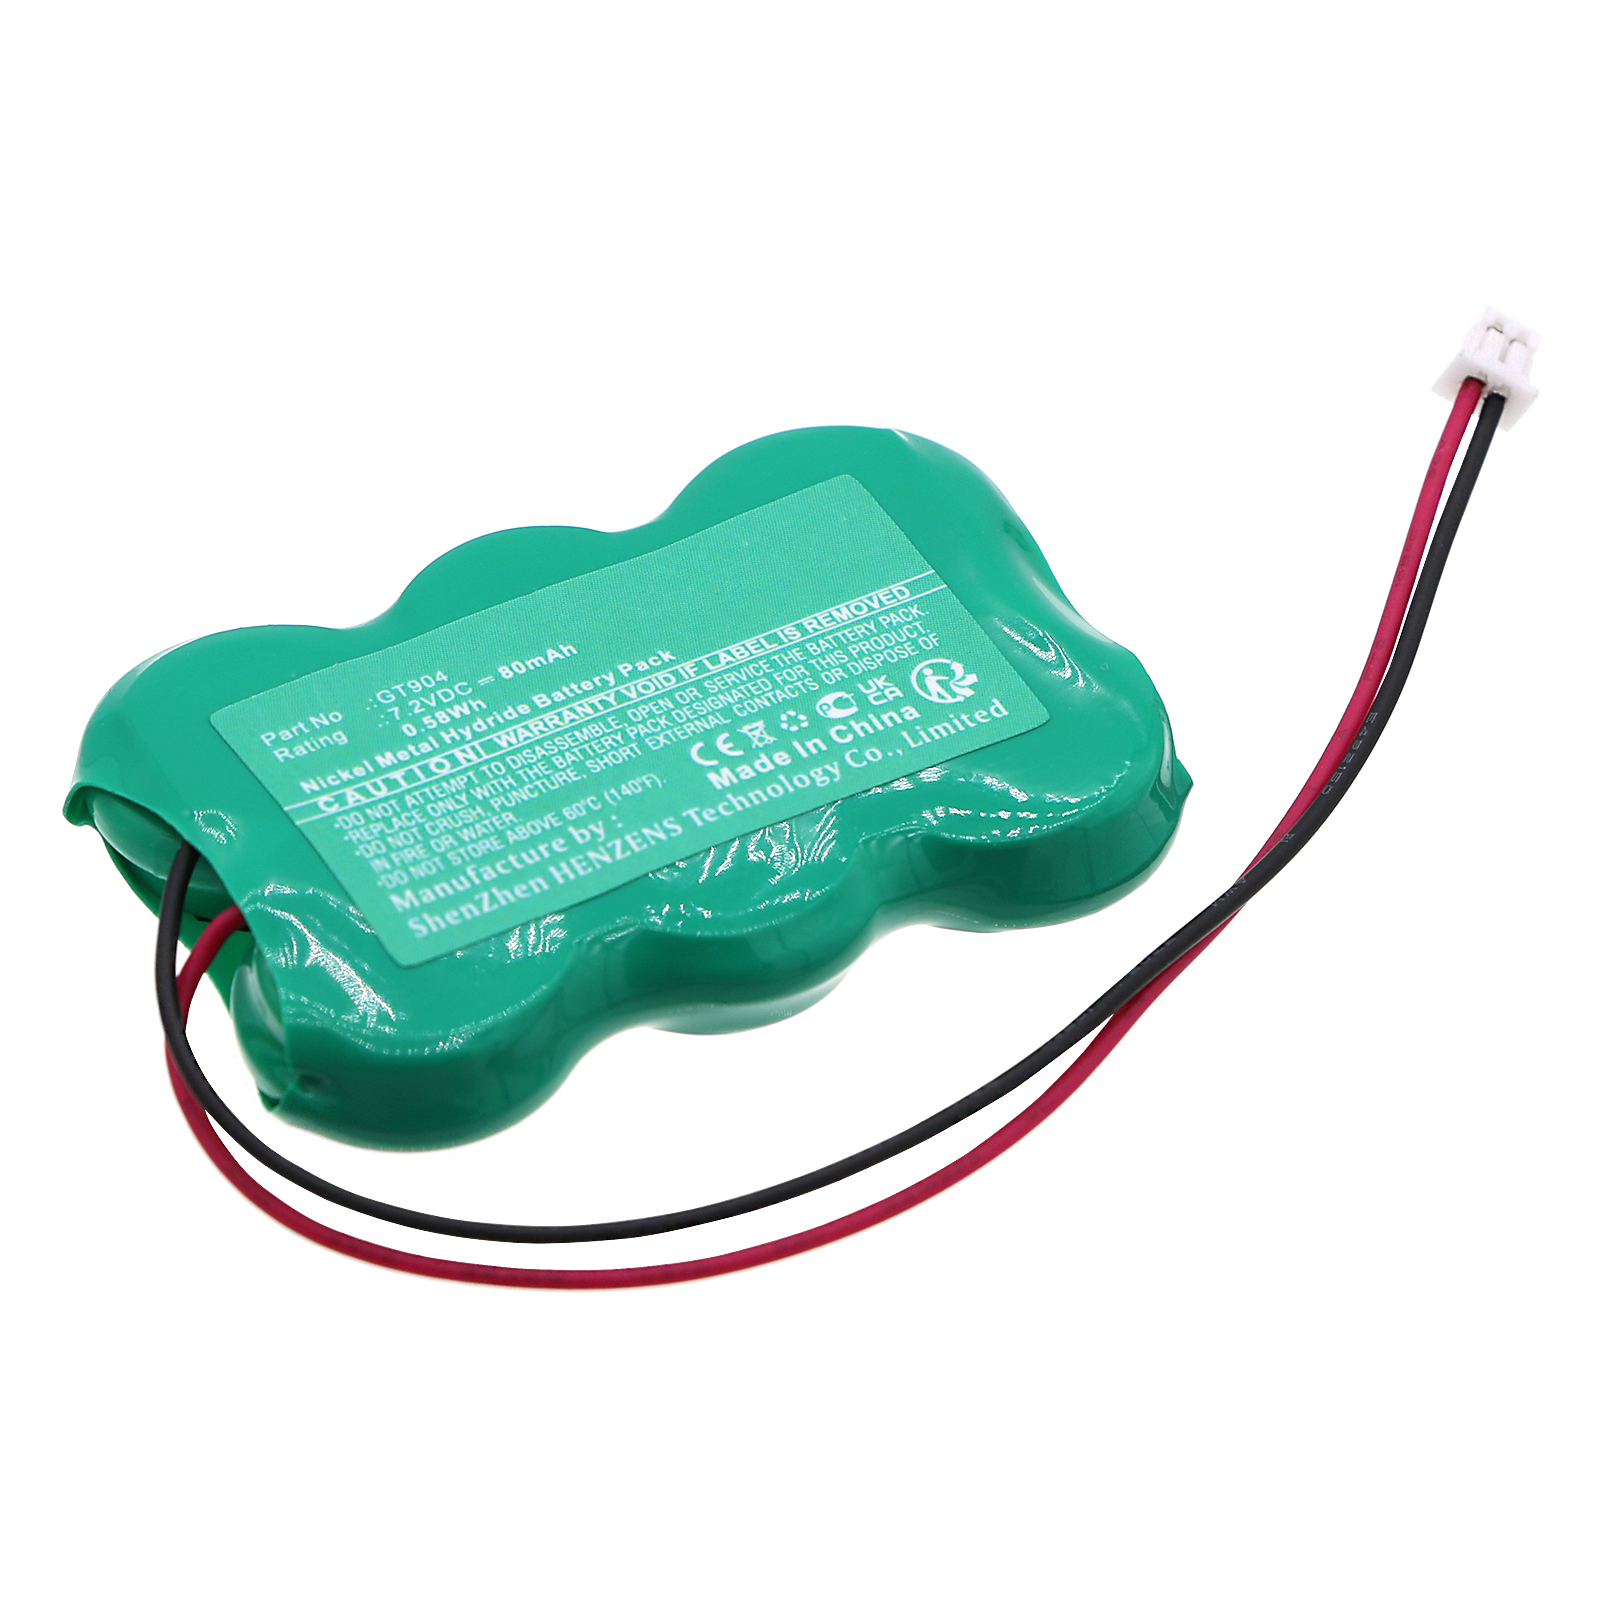 Synergy Digital Siren Alarm Battery, Compatible with Getronic GT904 Siren Alarm Battery (Ni-MH, 7.2V, 80mAh)